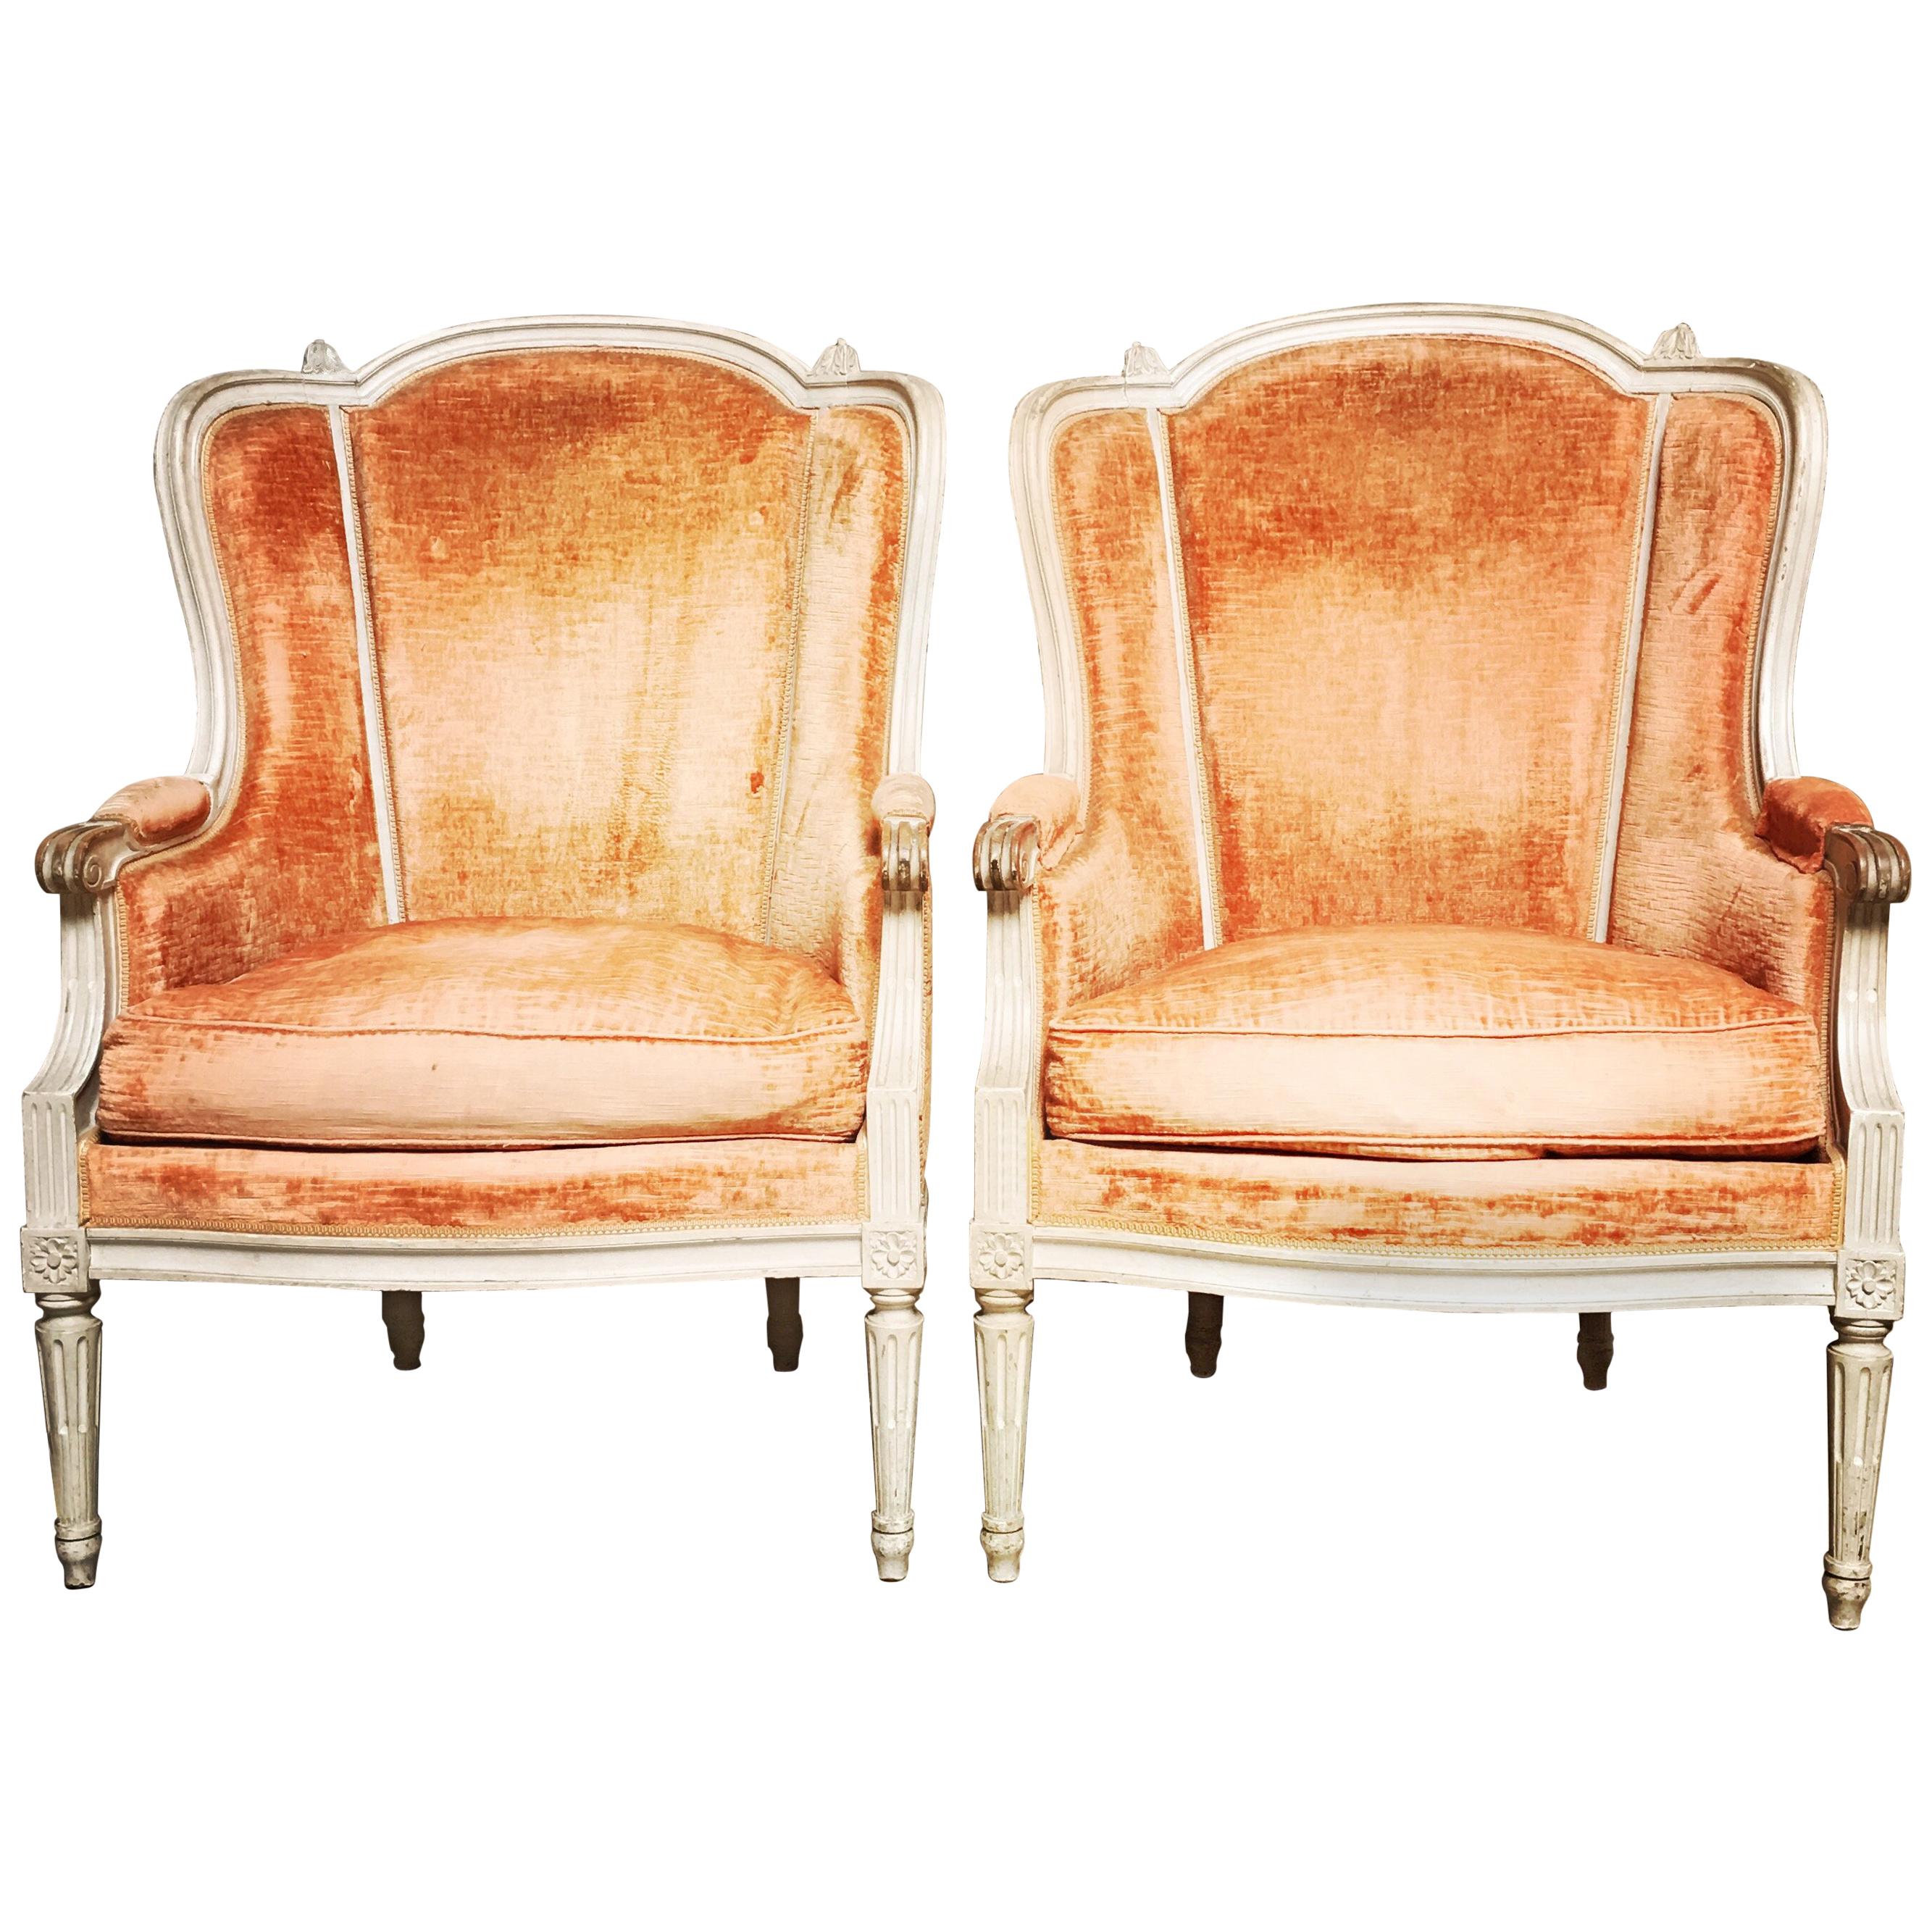 Pair of French Louis XVI Style Bergeres with a Gray Painted Finish